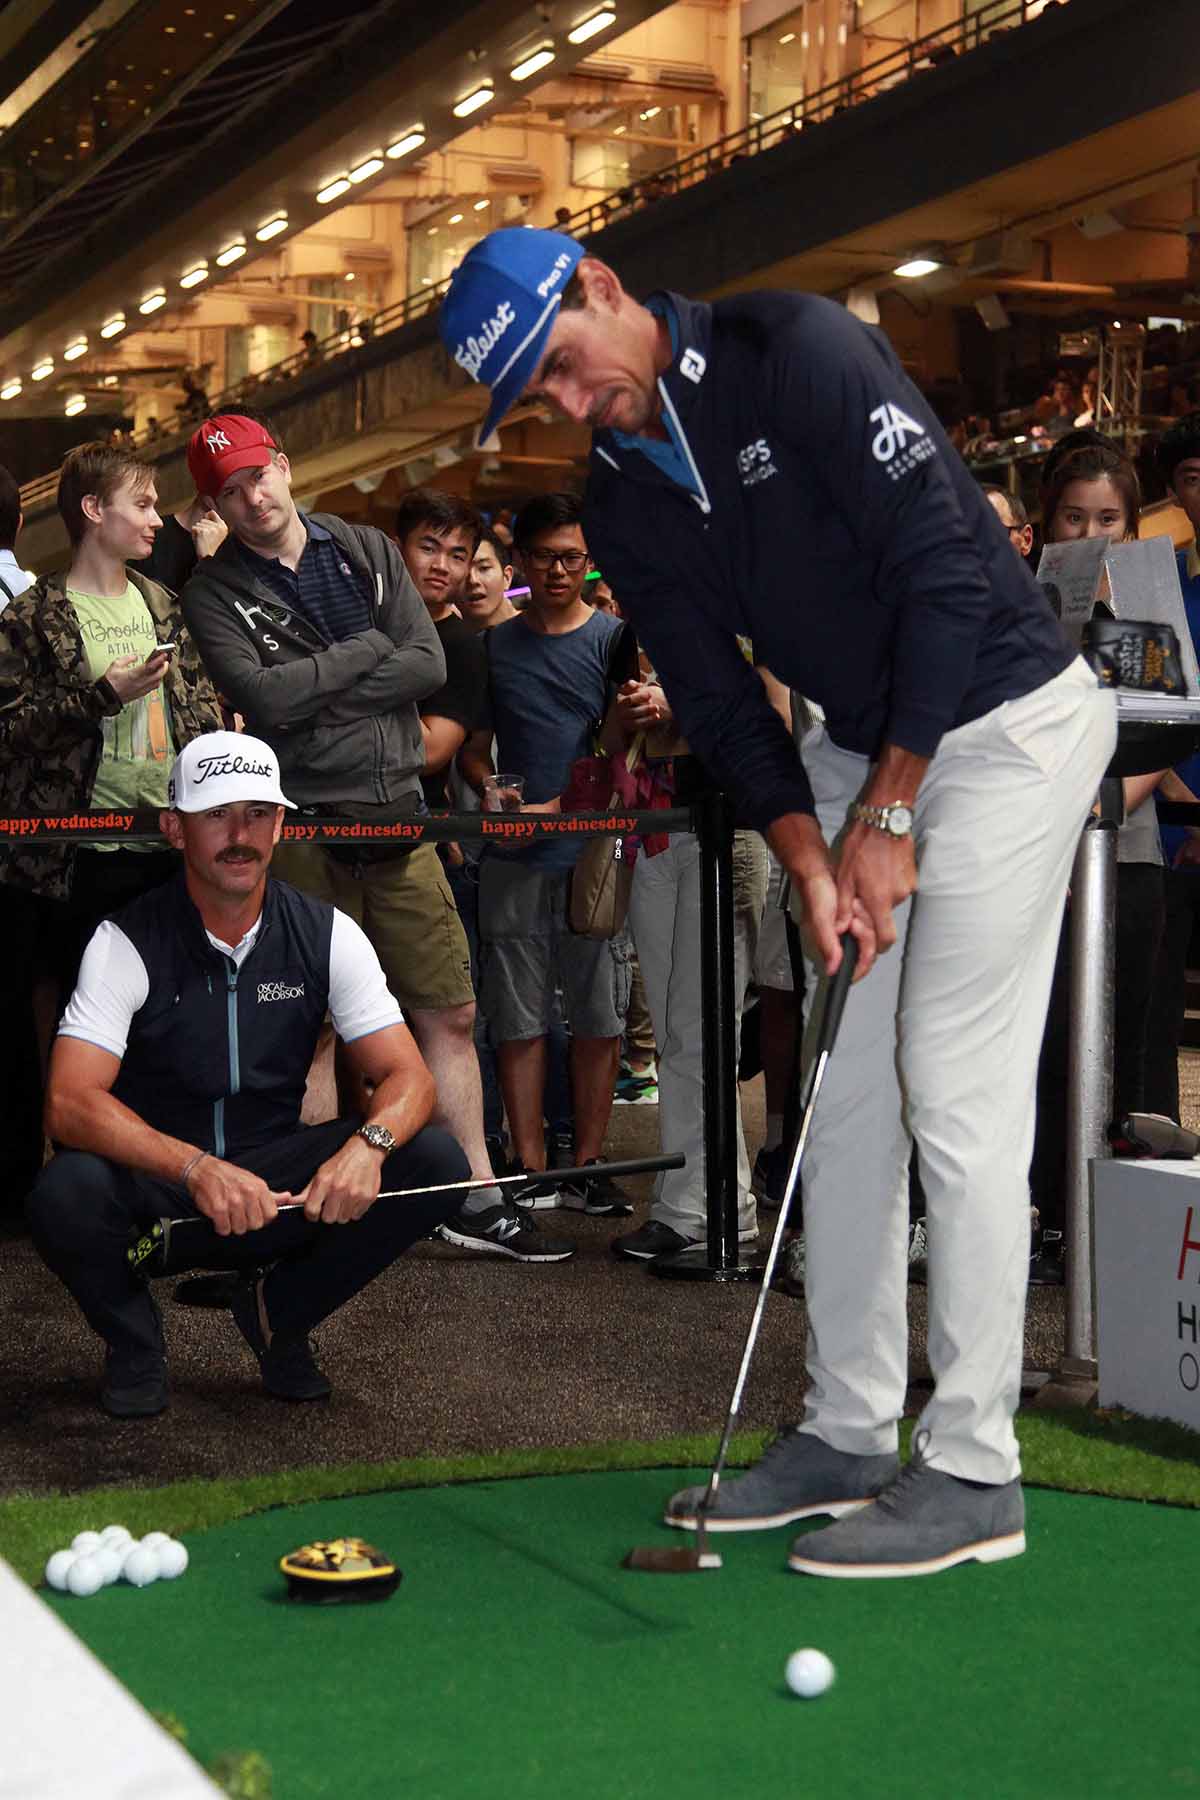 World-class golfers Wade Ormsby (Photo 4 – left) and Rafa Cabrera Bello (Photo 4 – right) show off their putting skills during their visit at the Beer Garden at Happy Valley Racecourse tonight. Both Ormsby and Bello will take part in the Honma Hong Kong Open at Fanling tomorrow.